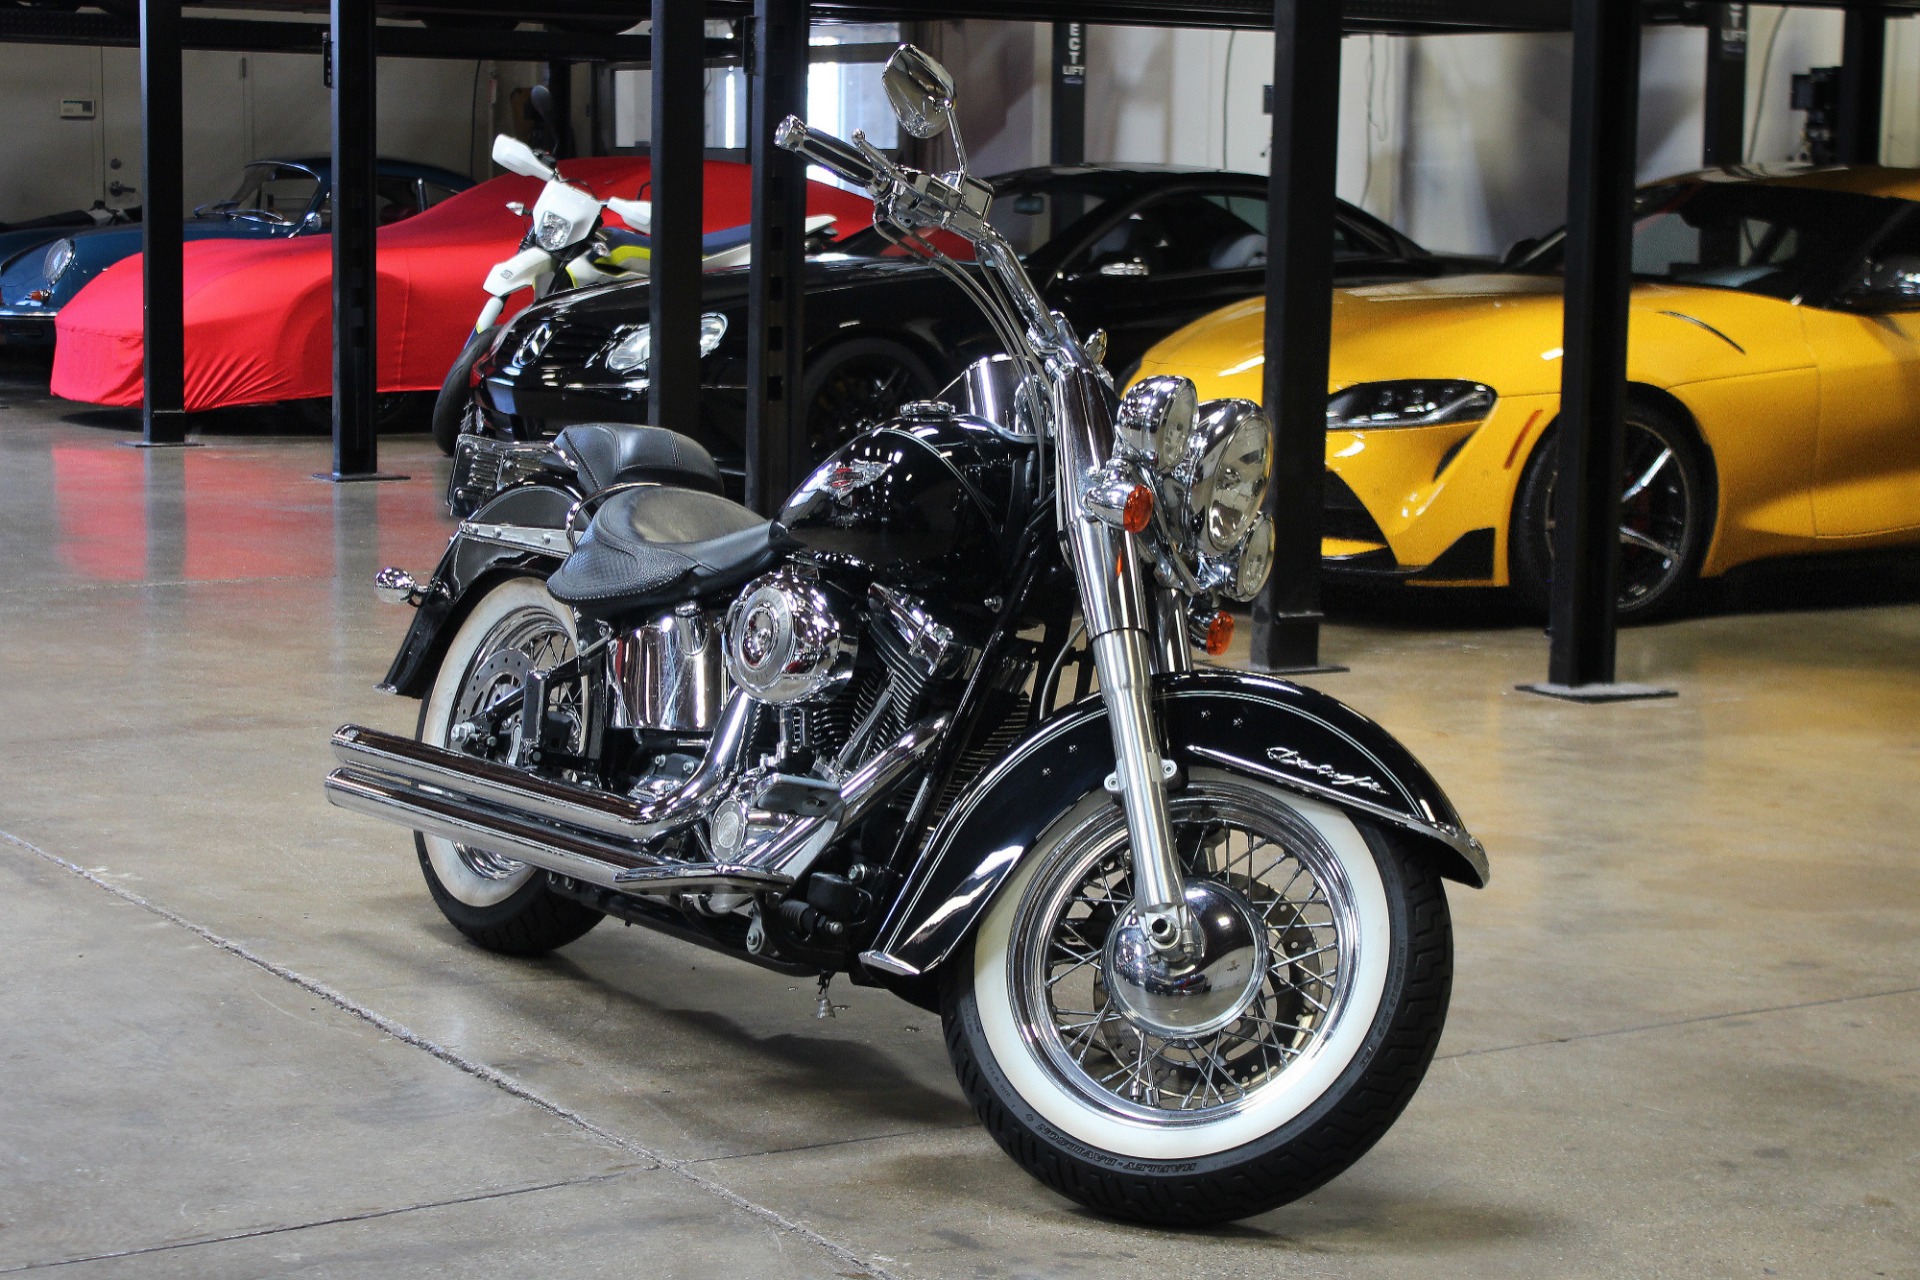 Used 2007 Harley Davidson Softtail Deluxe FLSTNI for sale $10,995 at San Francisco Sports Cars in San Carlos CA 94070 1